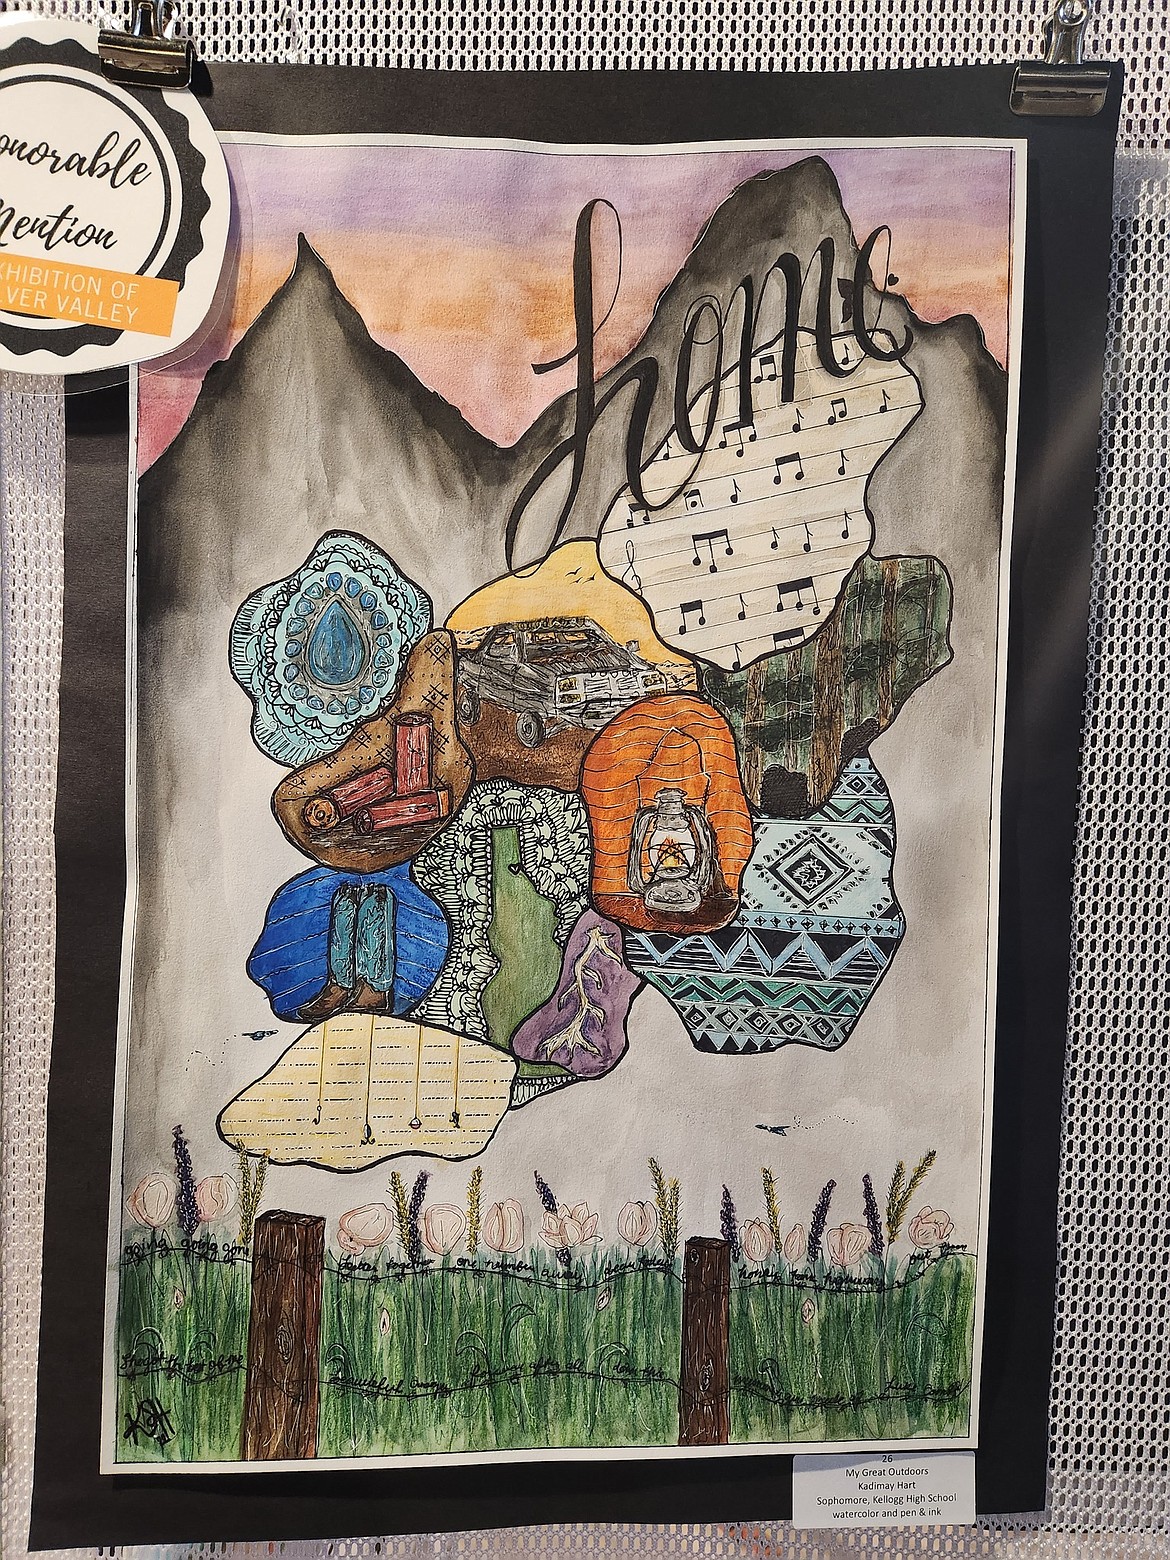 HONORABLE MENTION: “My Great Outdoors” by Kadimay Hart (Kellogg)